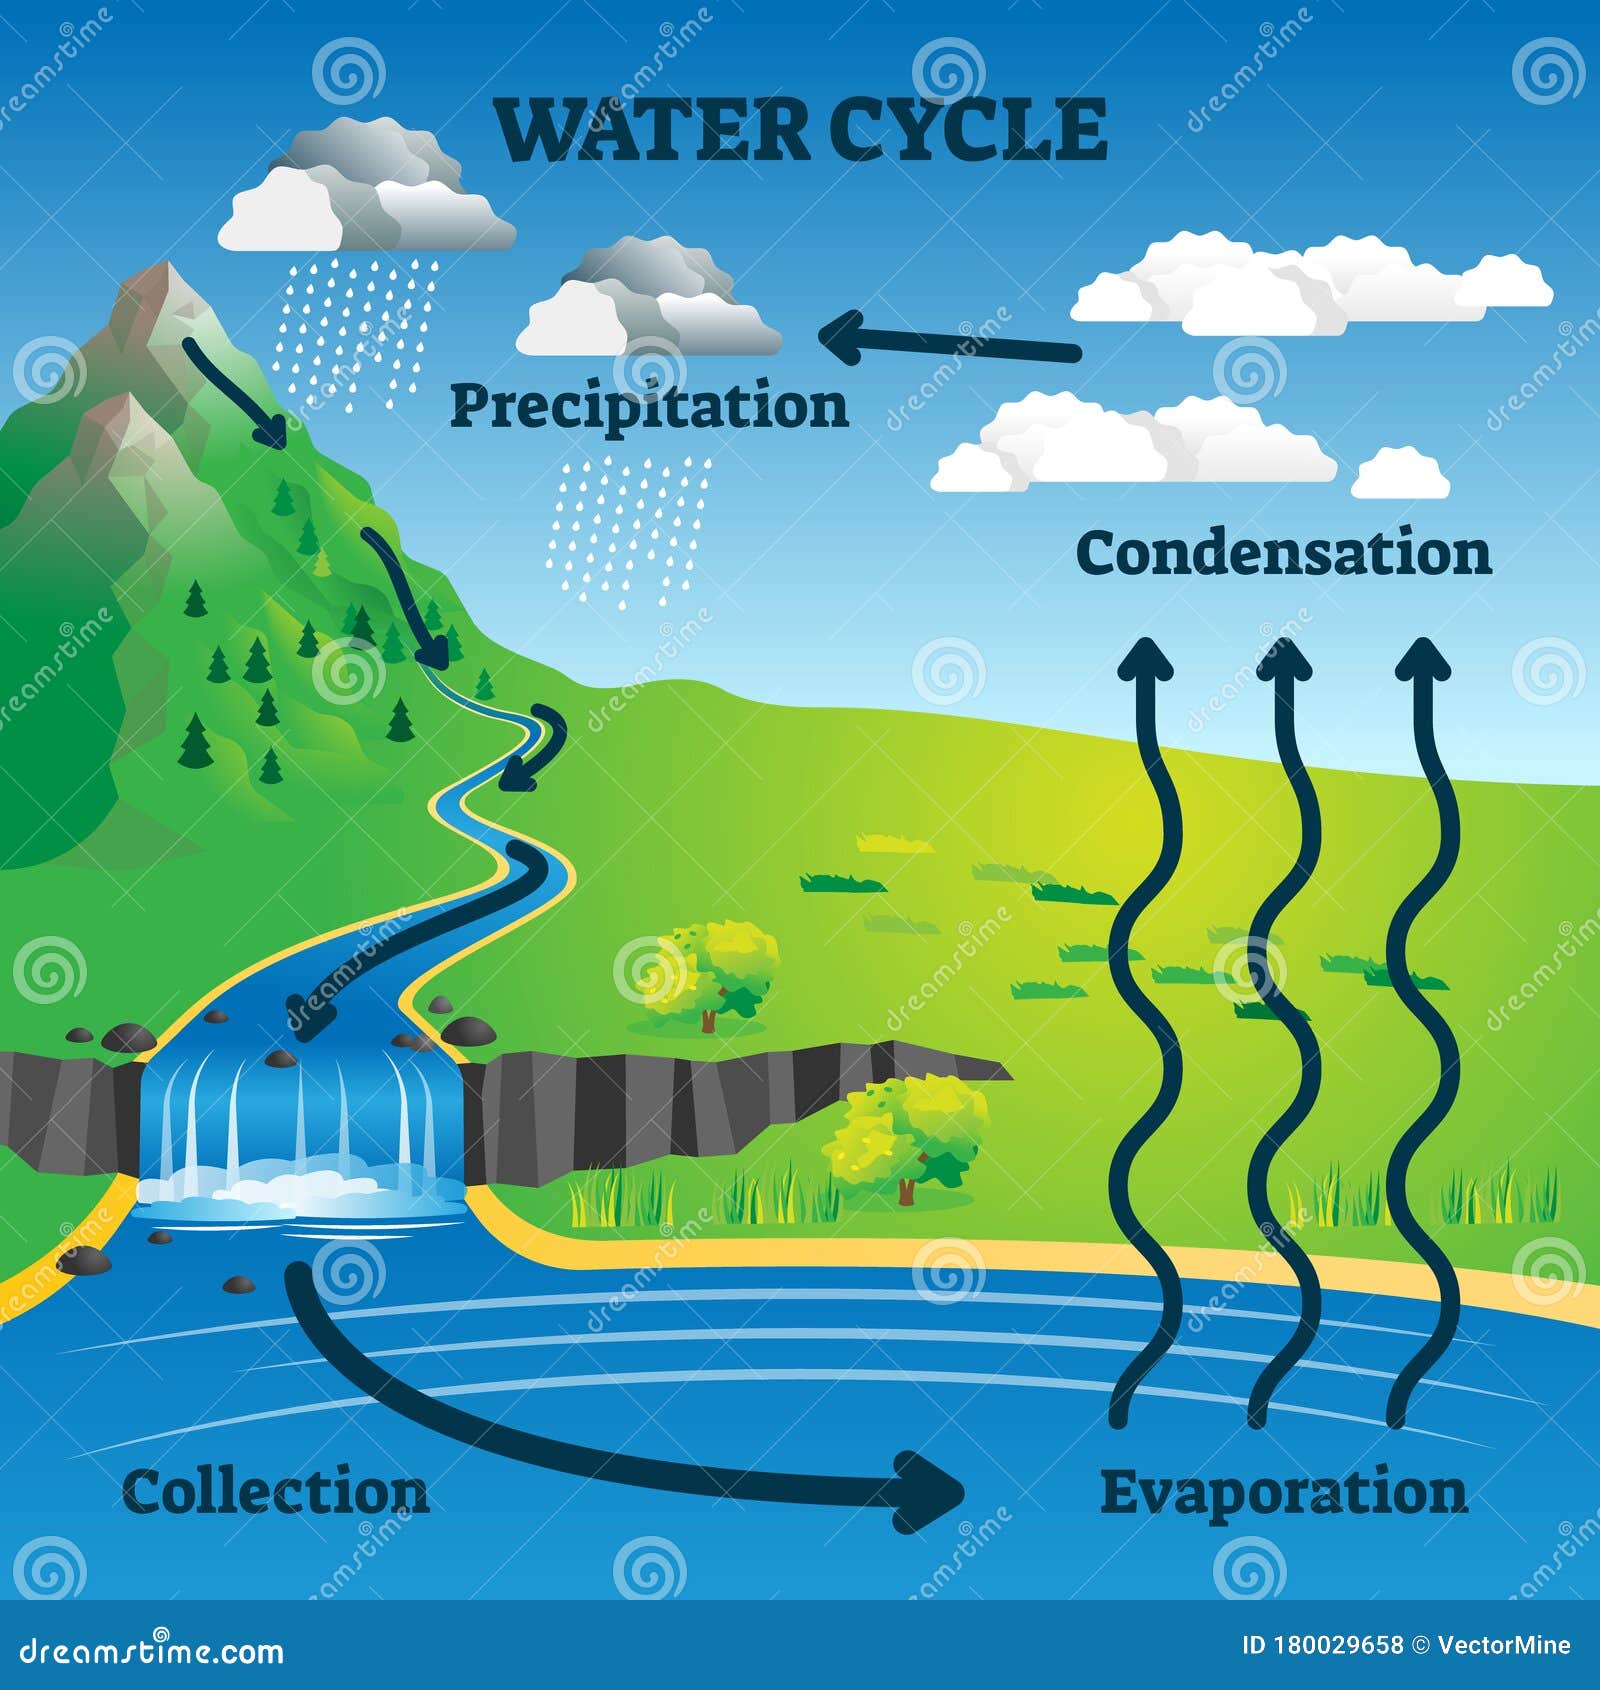 O Ciclo d'água, The water cycle, Portuguese